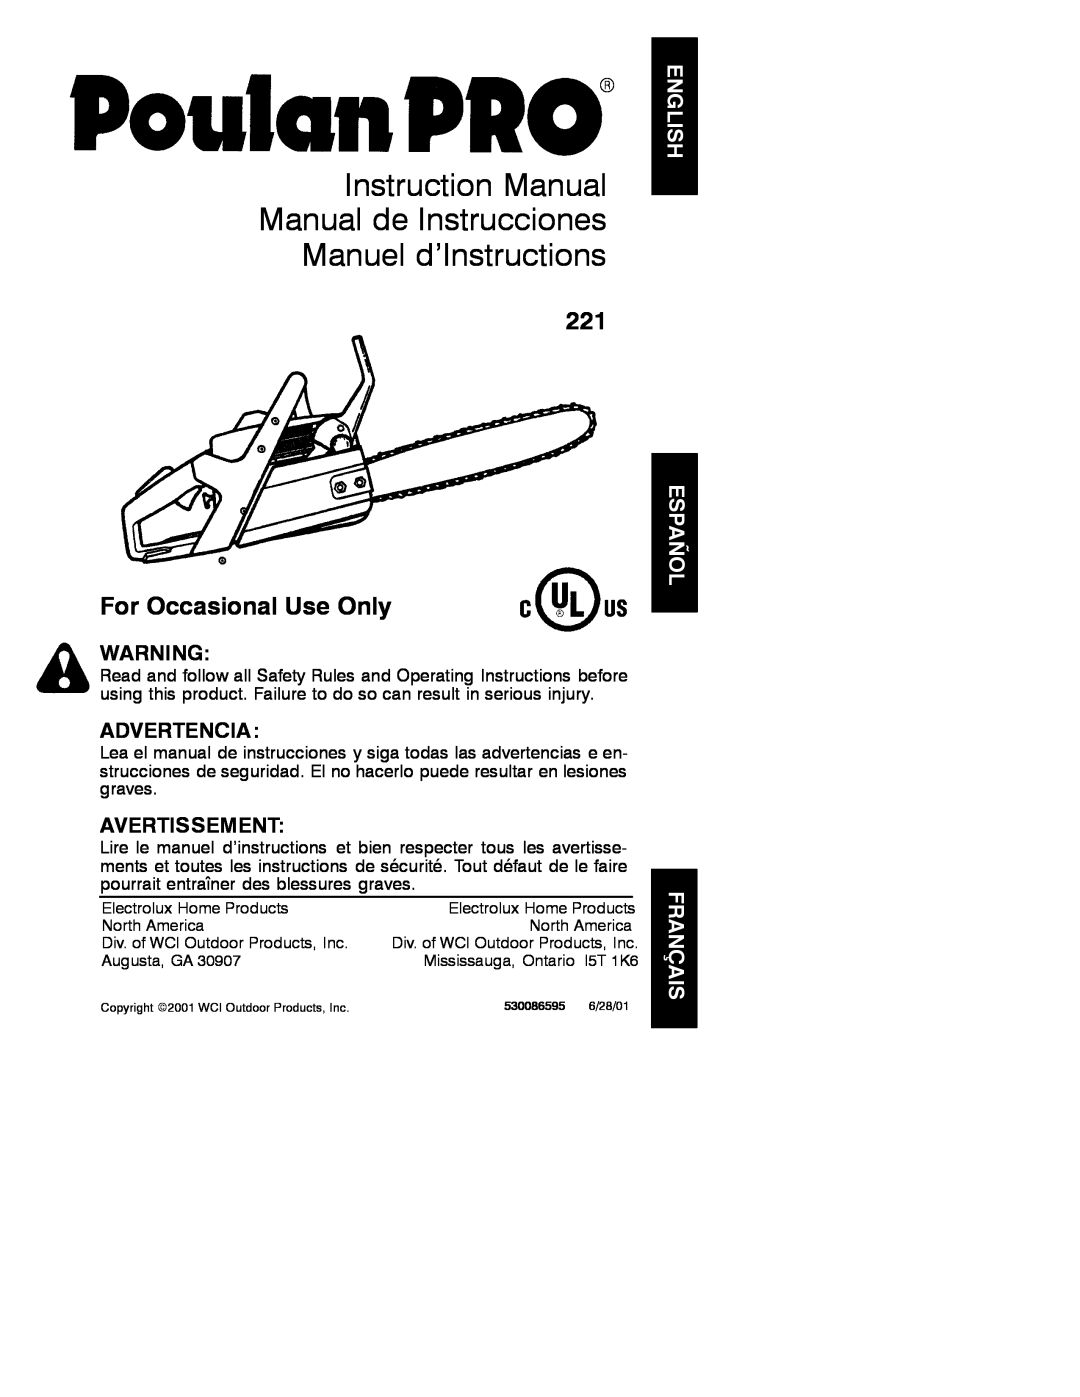 Poulan 221 instruction manual Manuel d’Instructions, For Occasional Use Only, Advertencia, Avertissement 